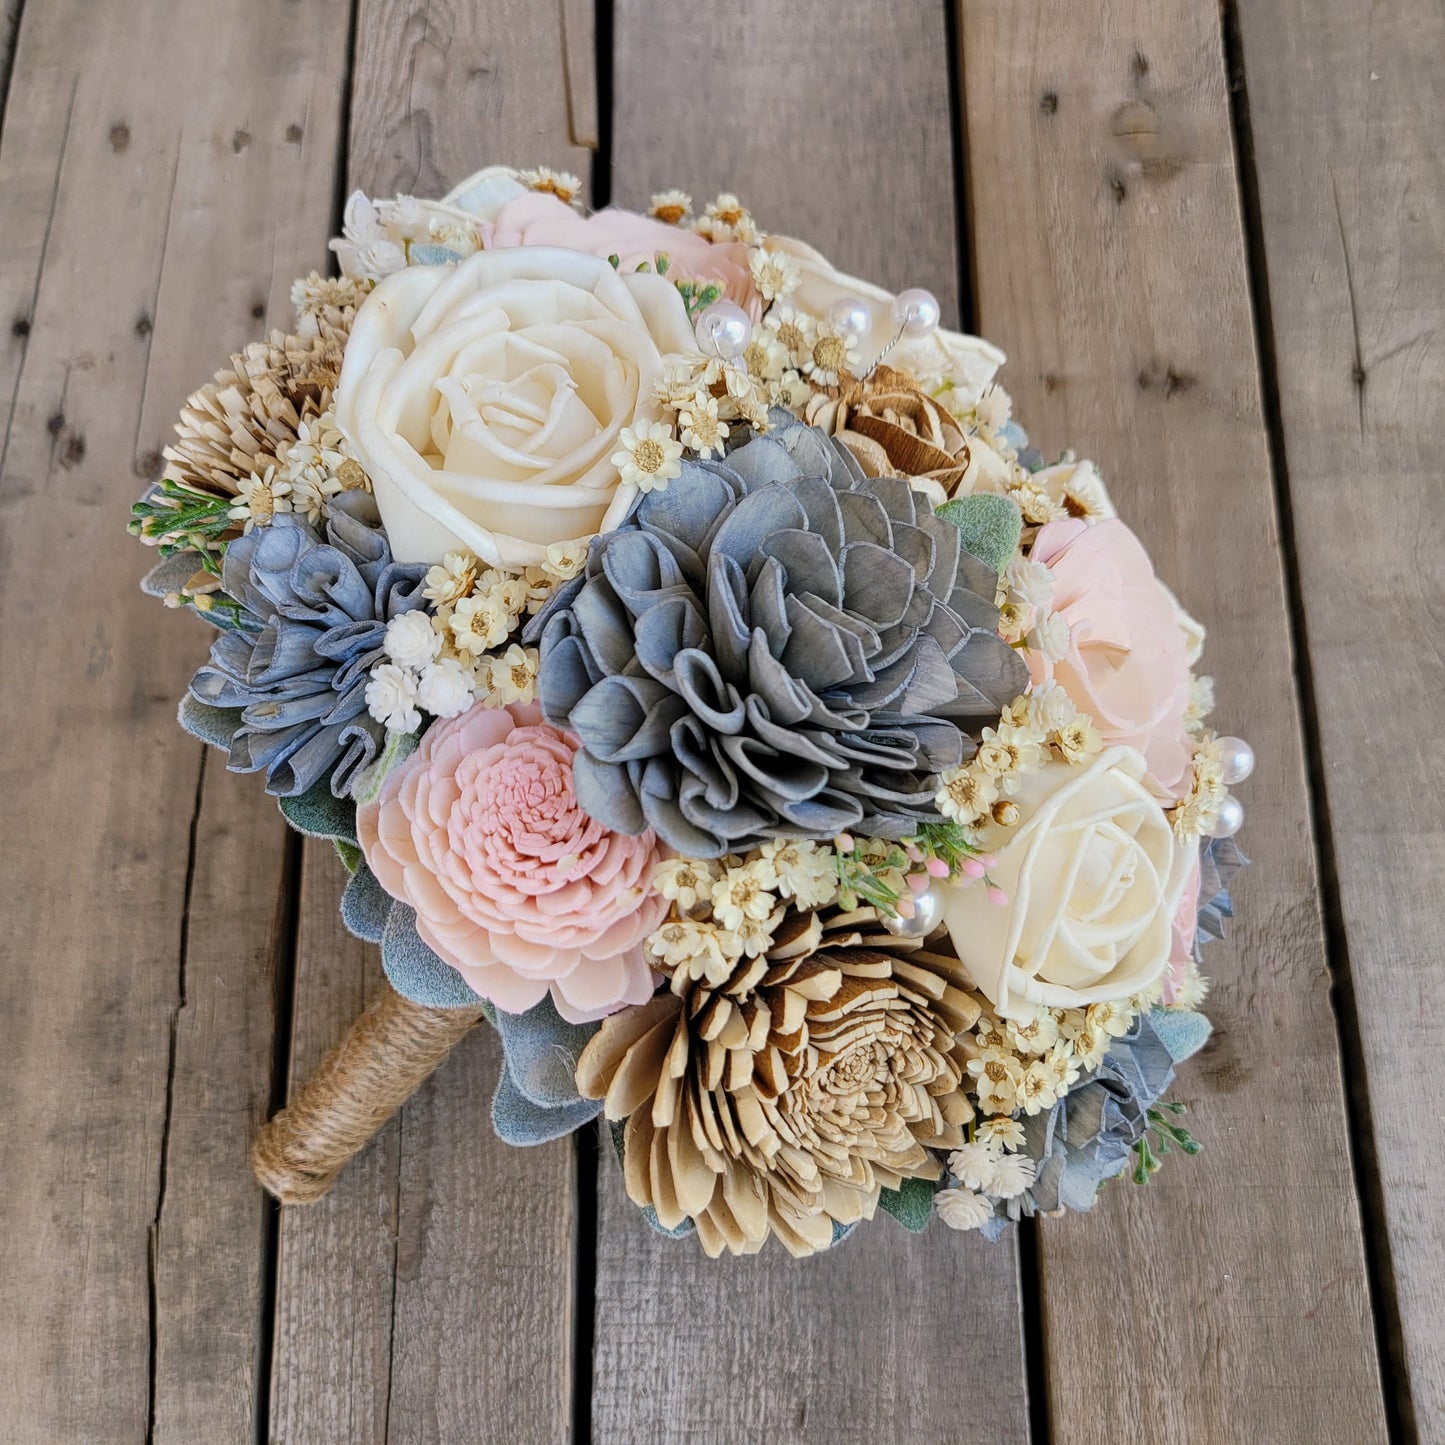 Wood Flower Bride Bouquet, Rustic Wedding Flowers, Bridal Bouquet with Pearls, Wooden Flowers